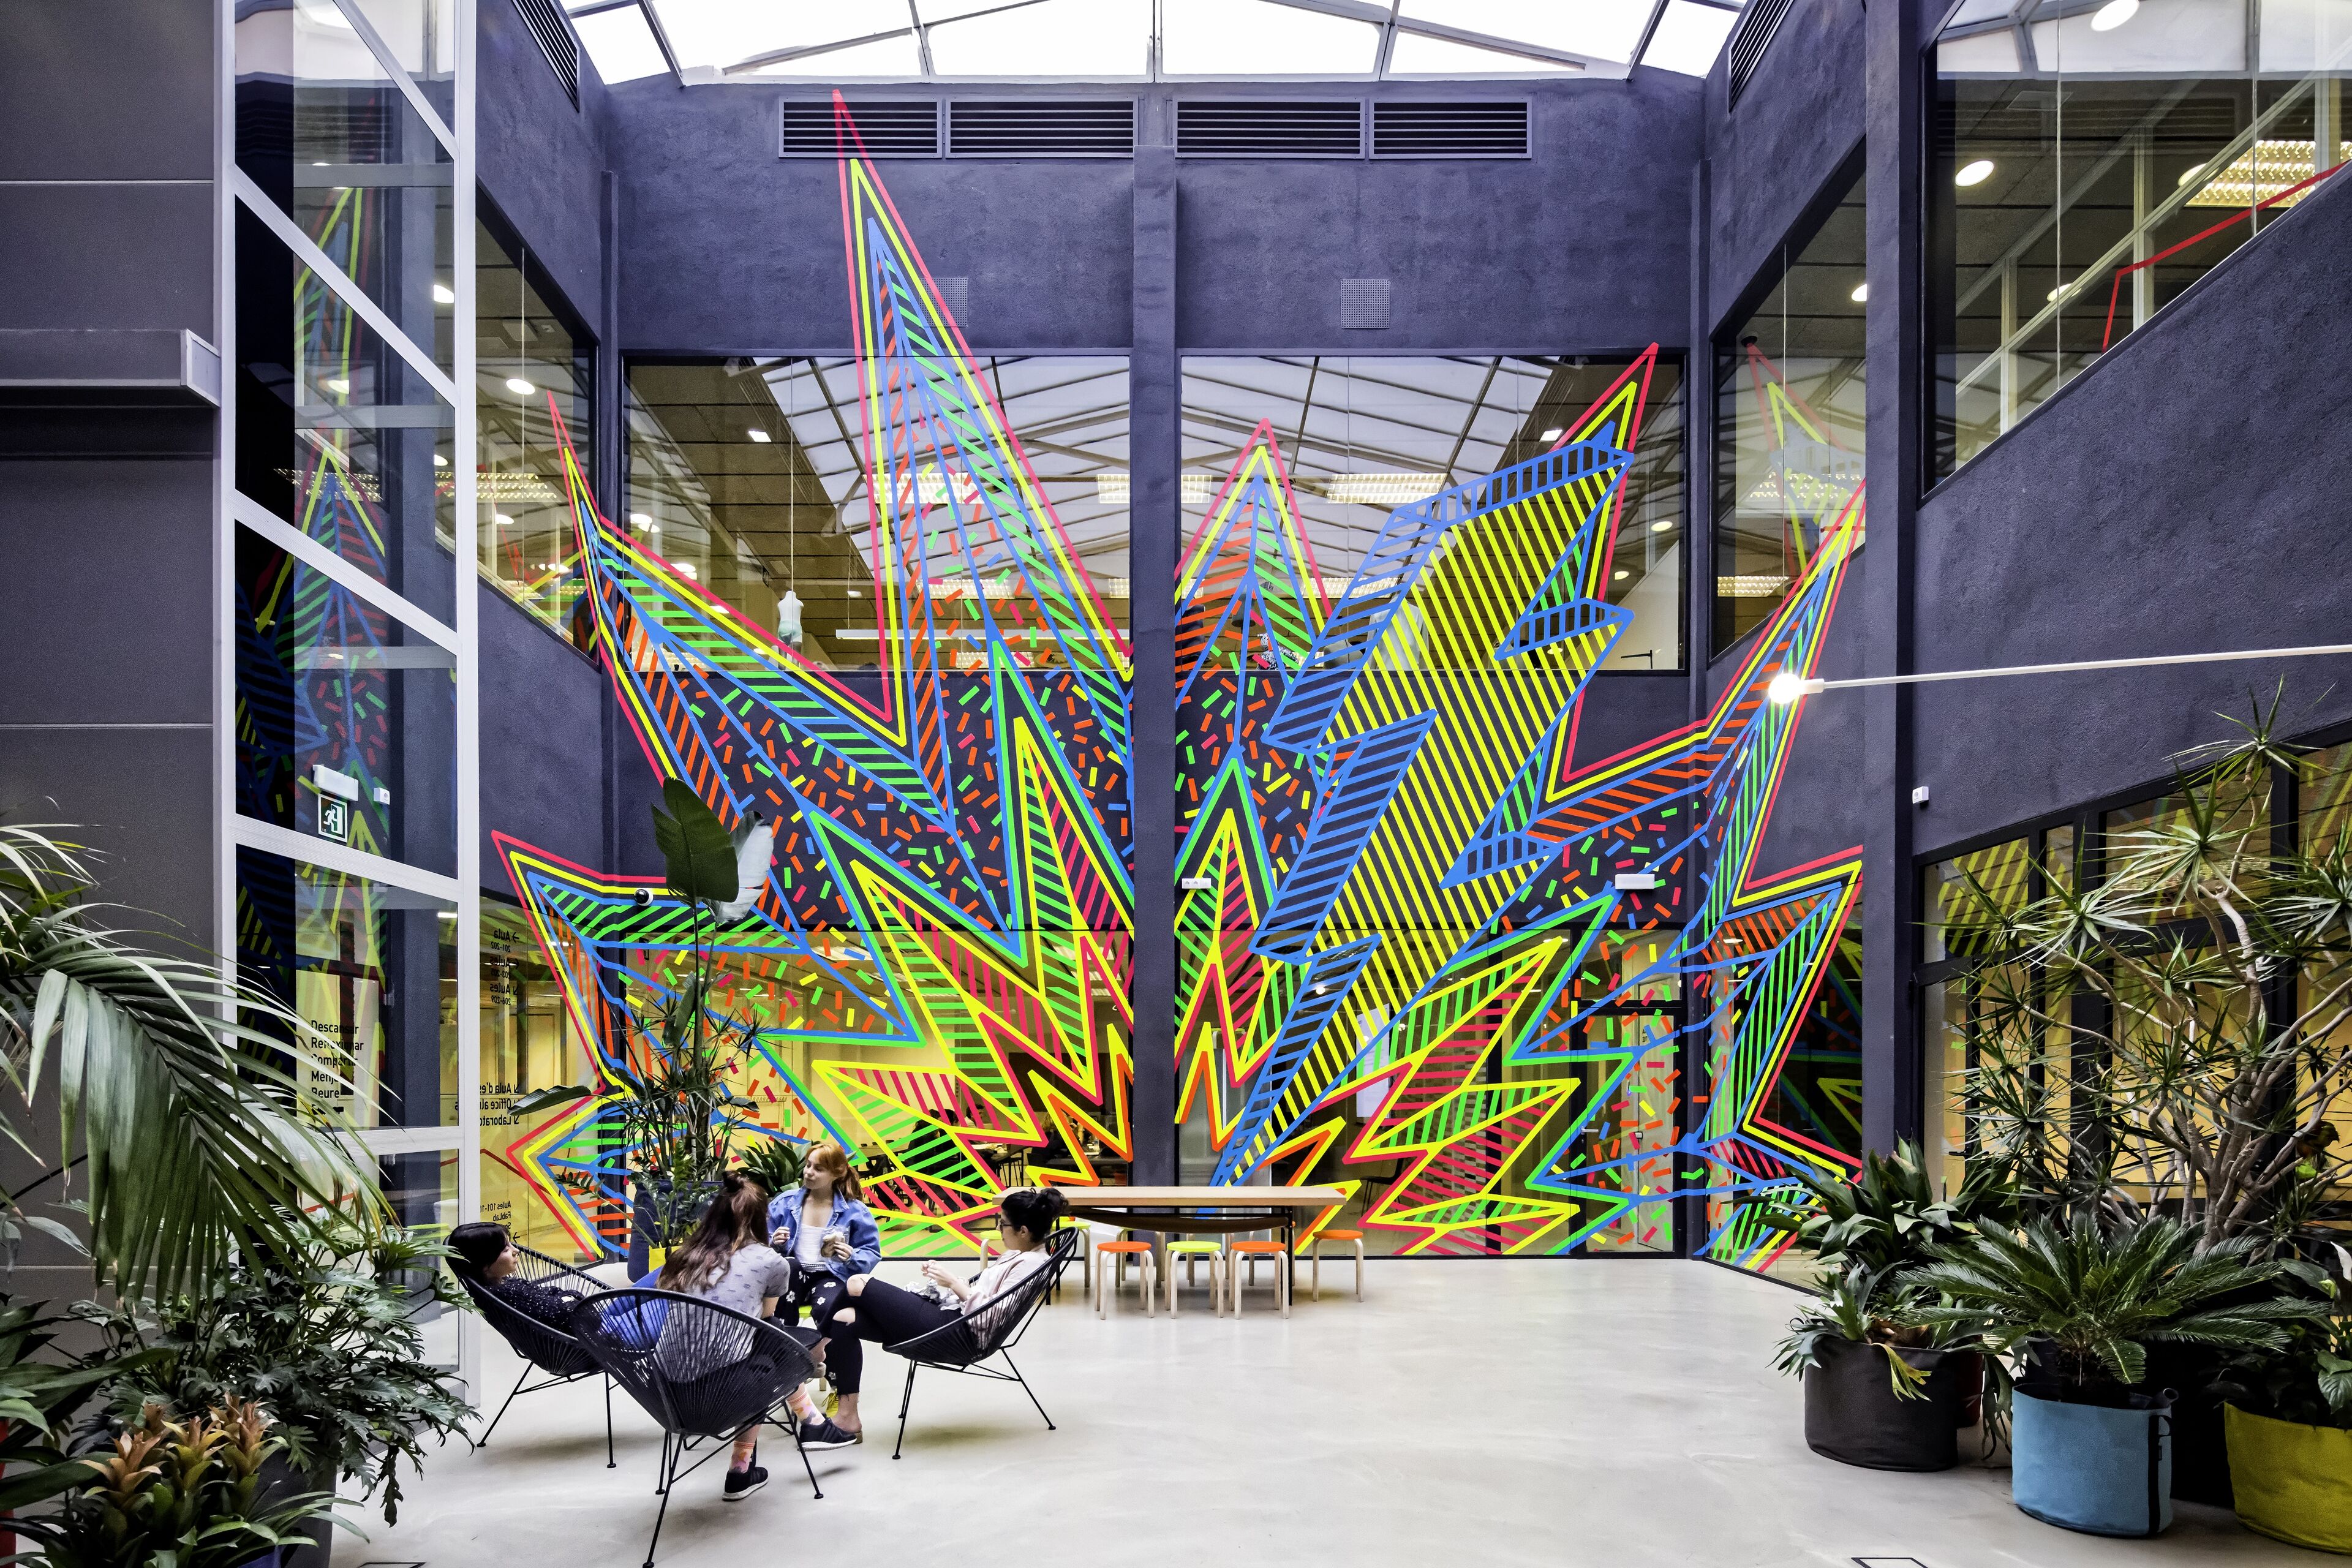 People relax in an atrium featuring a vibrant, geometric art installation surrounded by lush greenery.